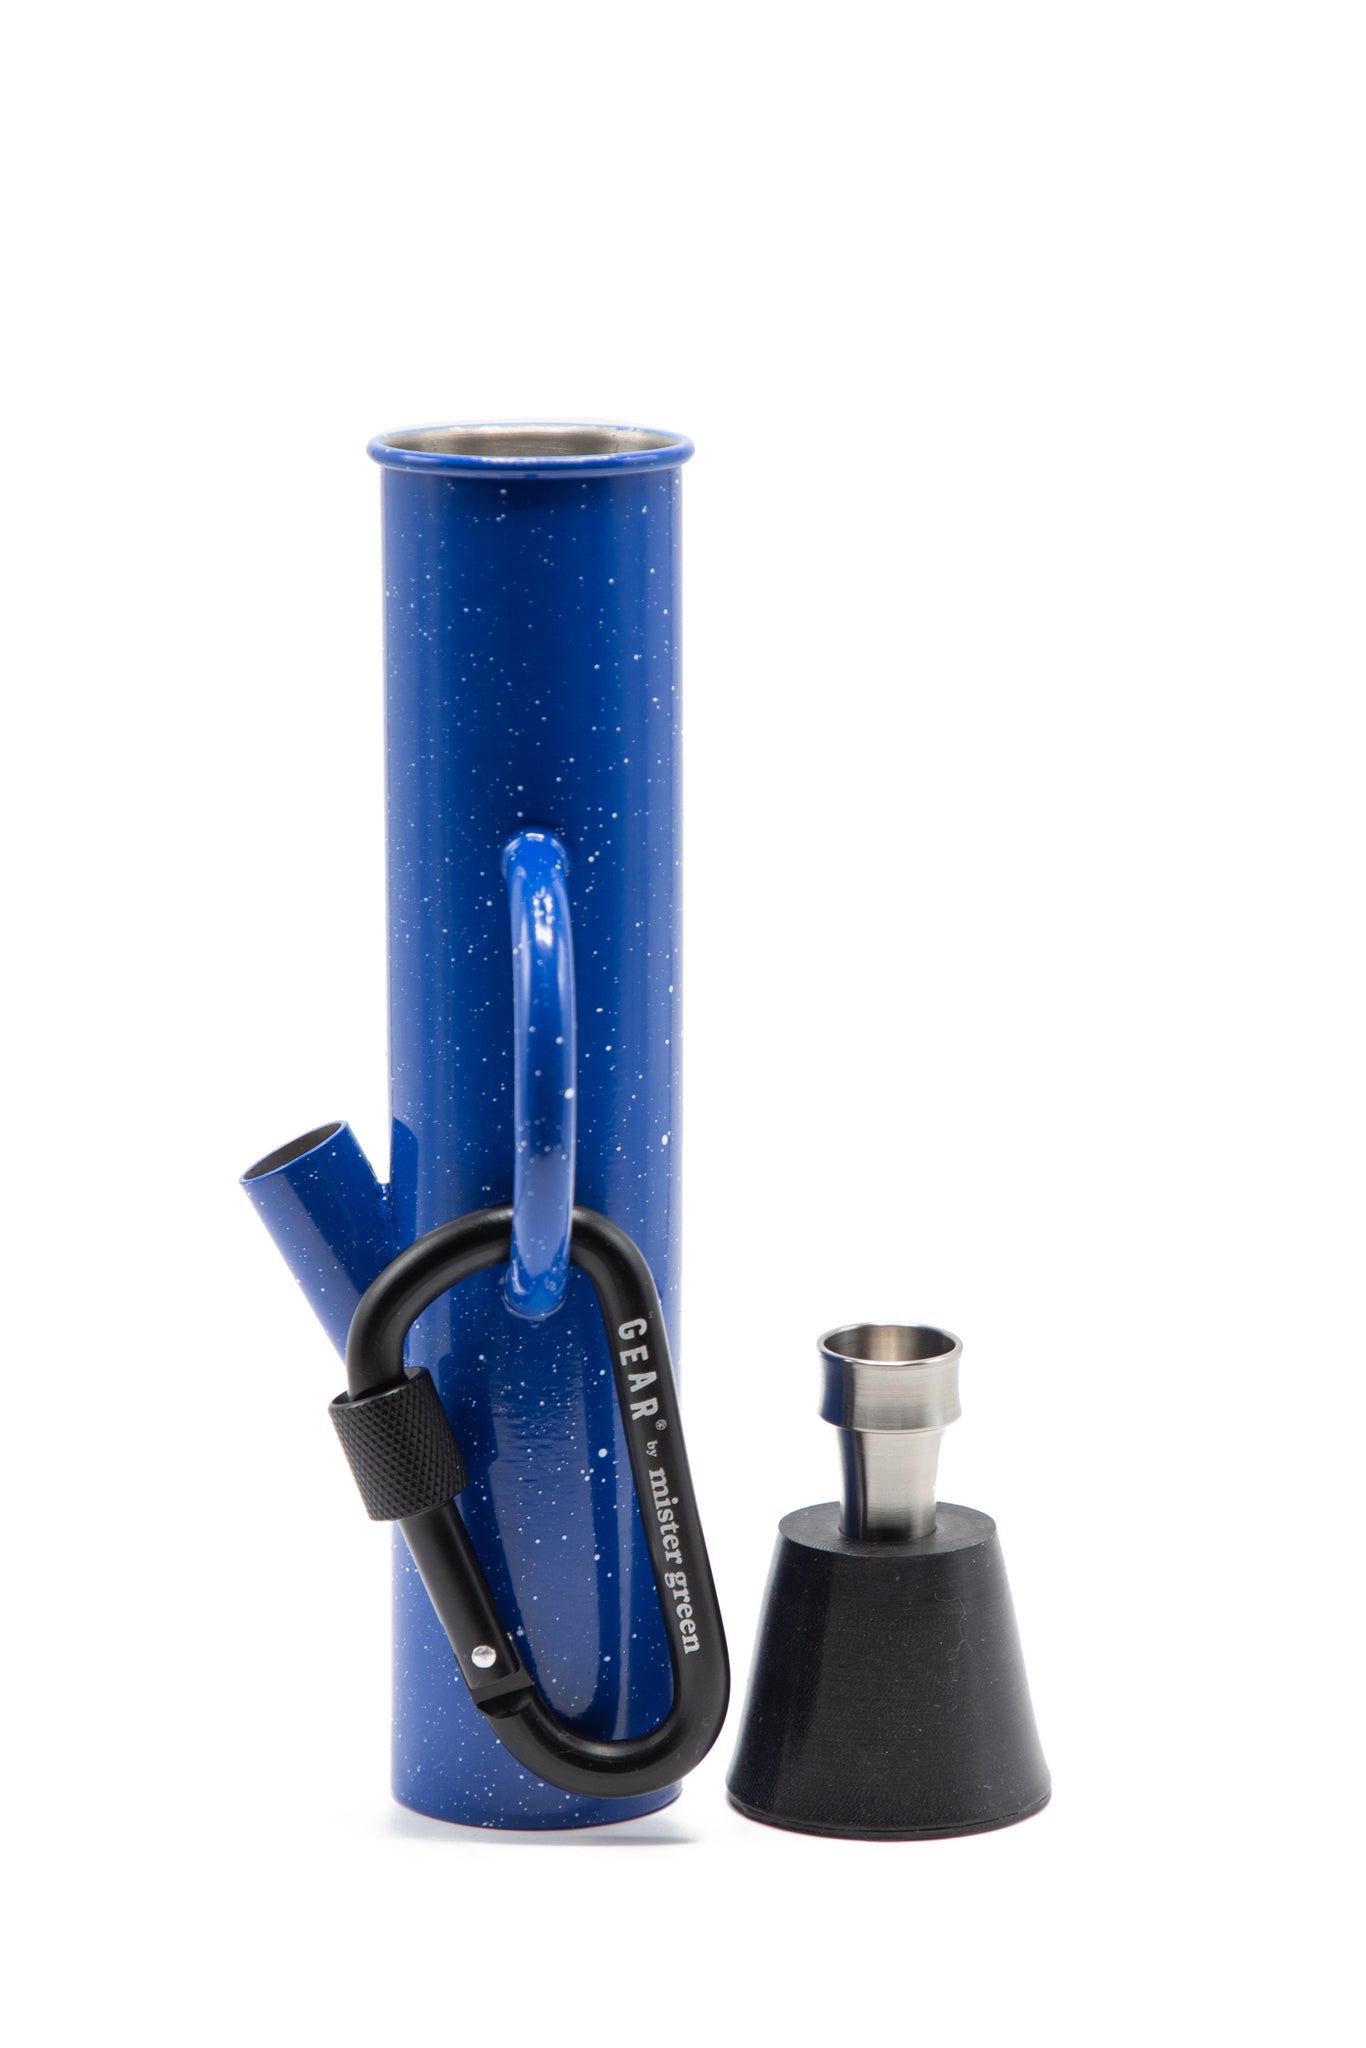 Dangle Supply x Mister Green Enamel Camp Mug Bong Featured in Forbes